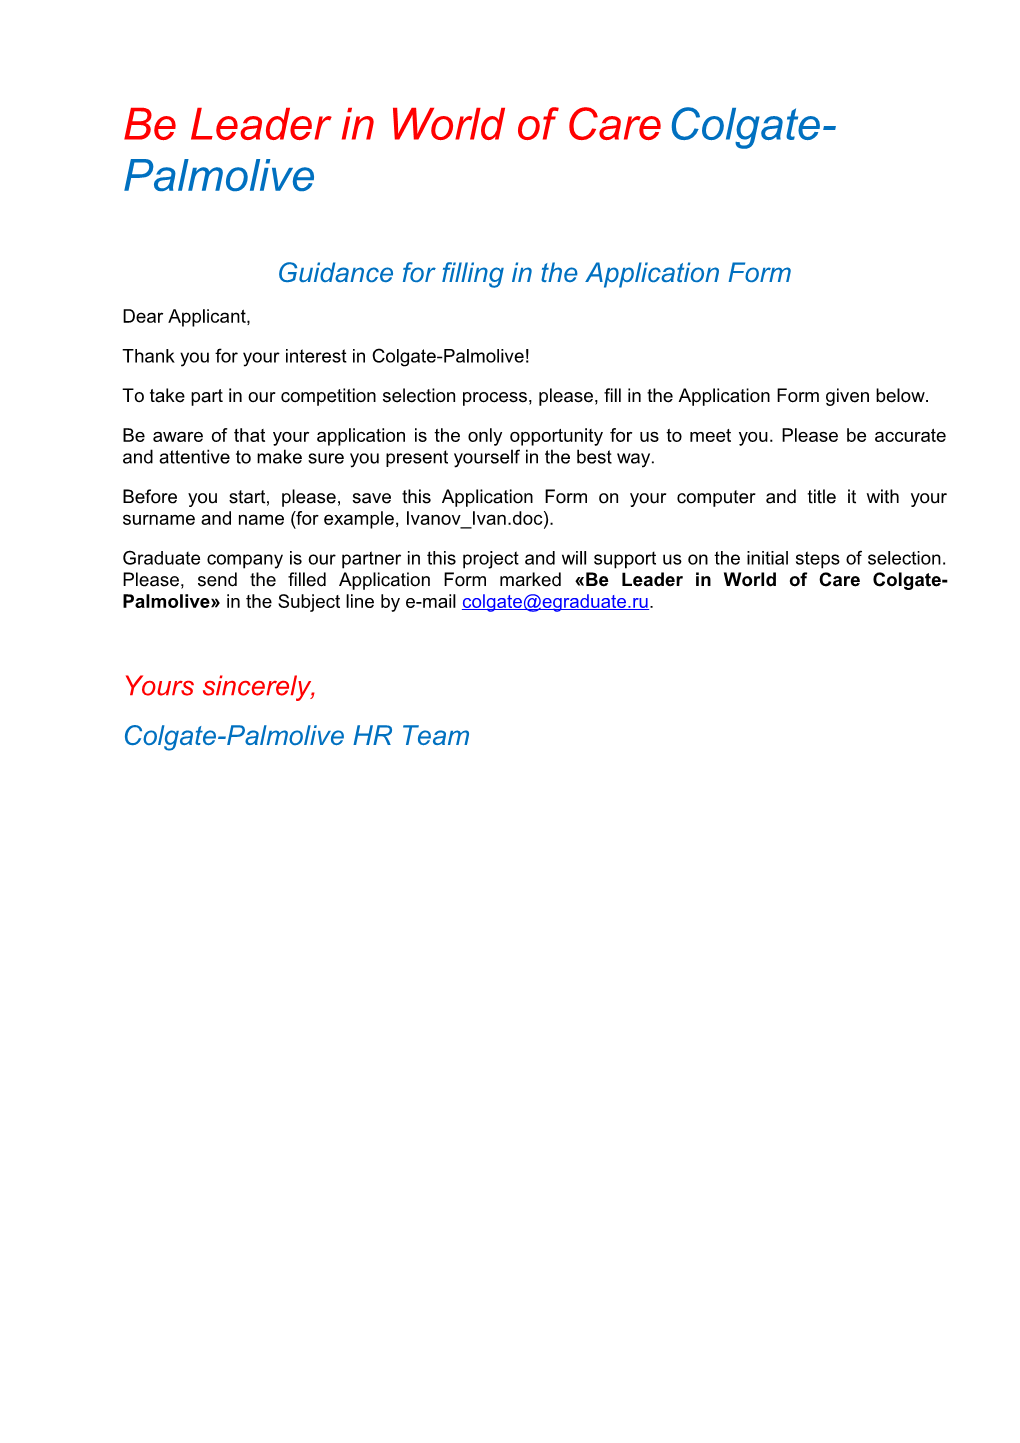 Guidance for Filling in the Application Form